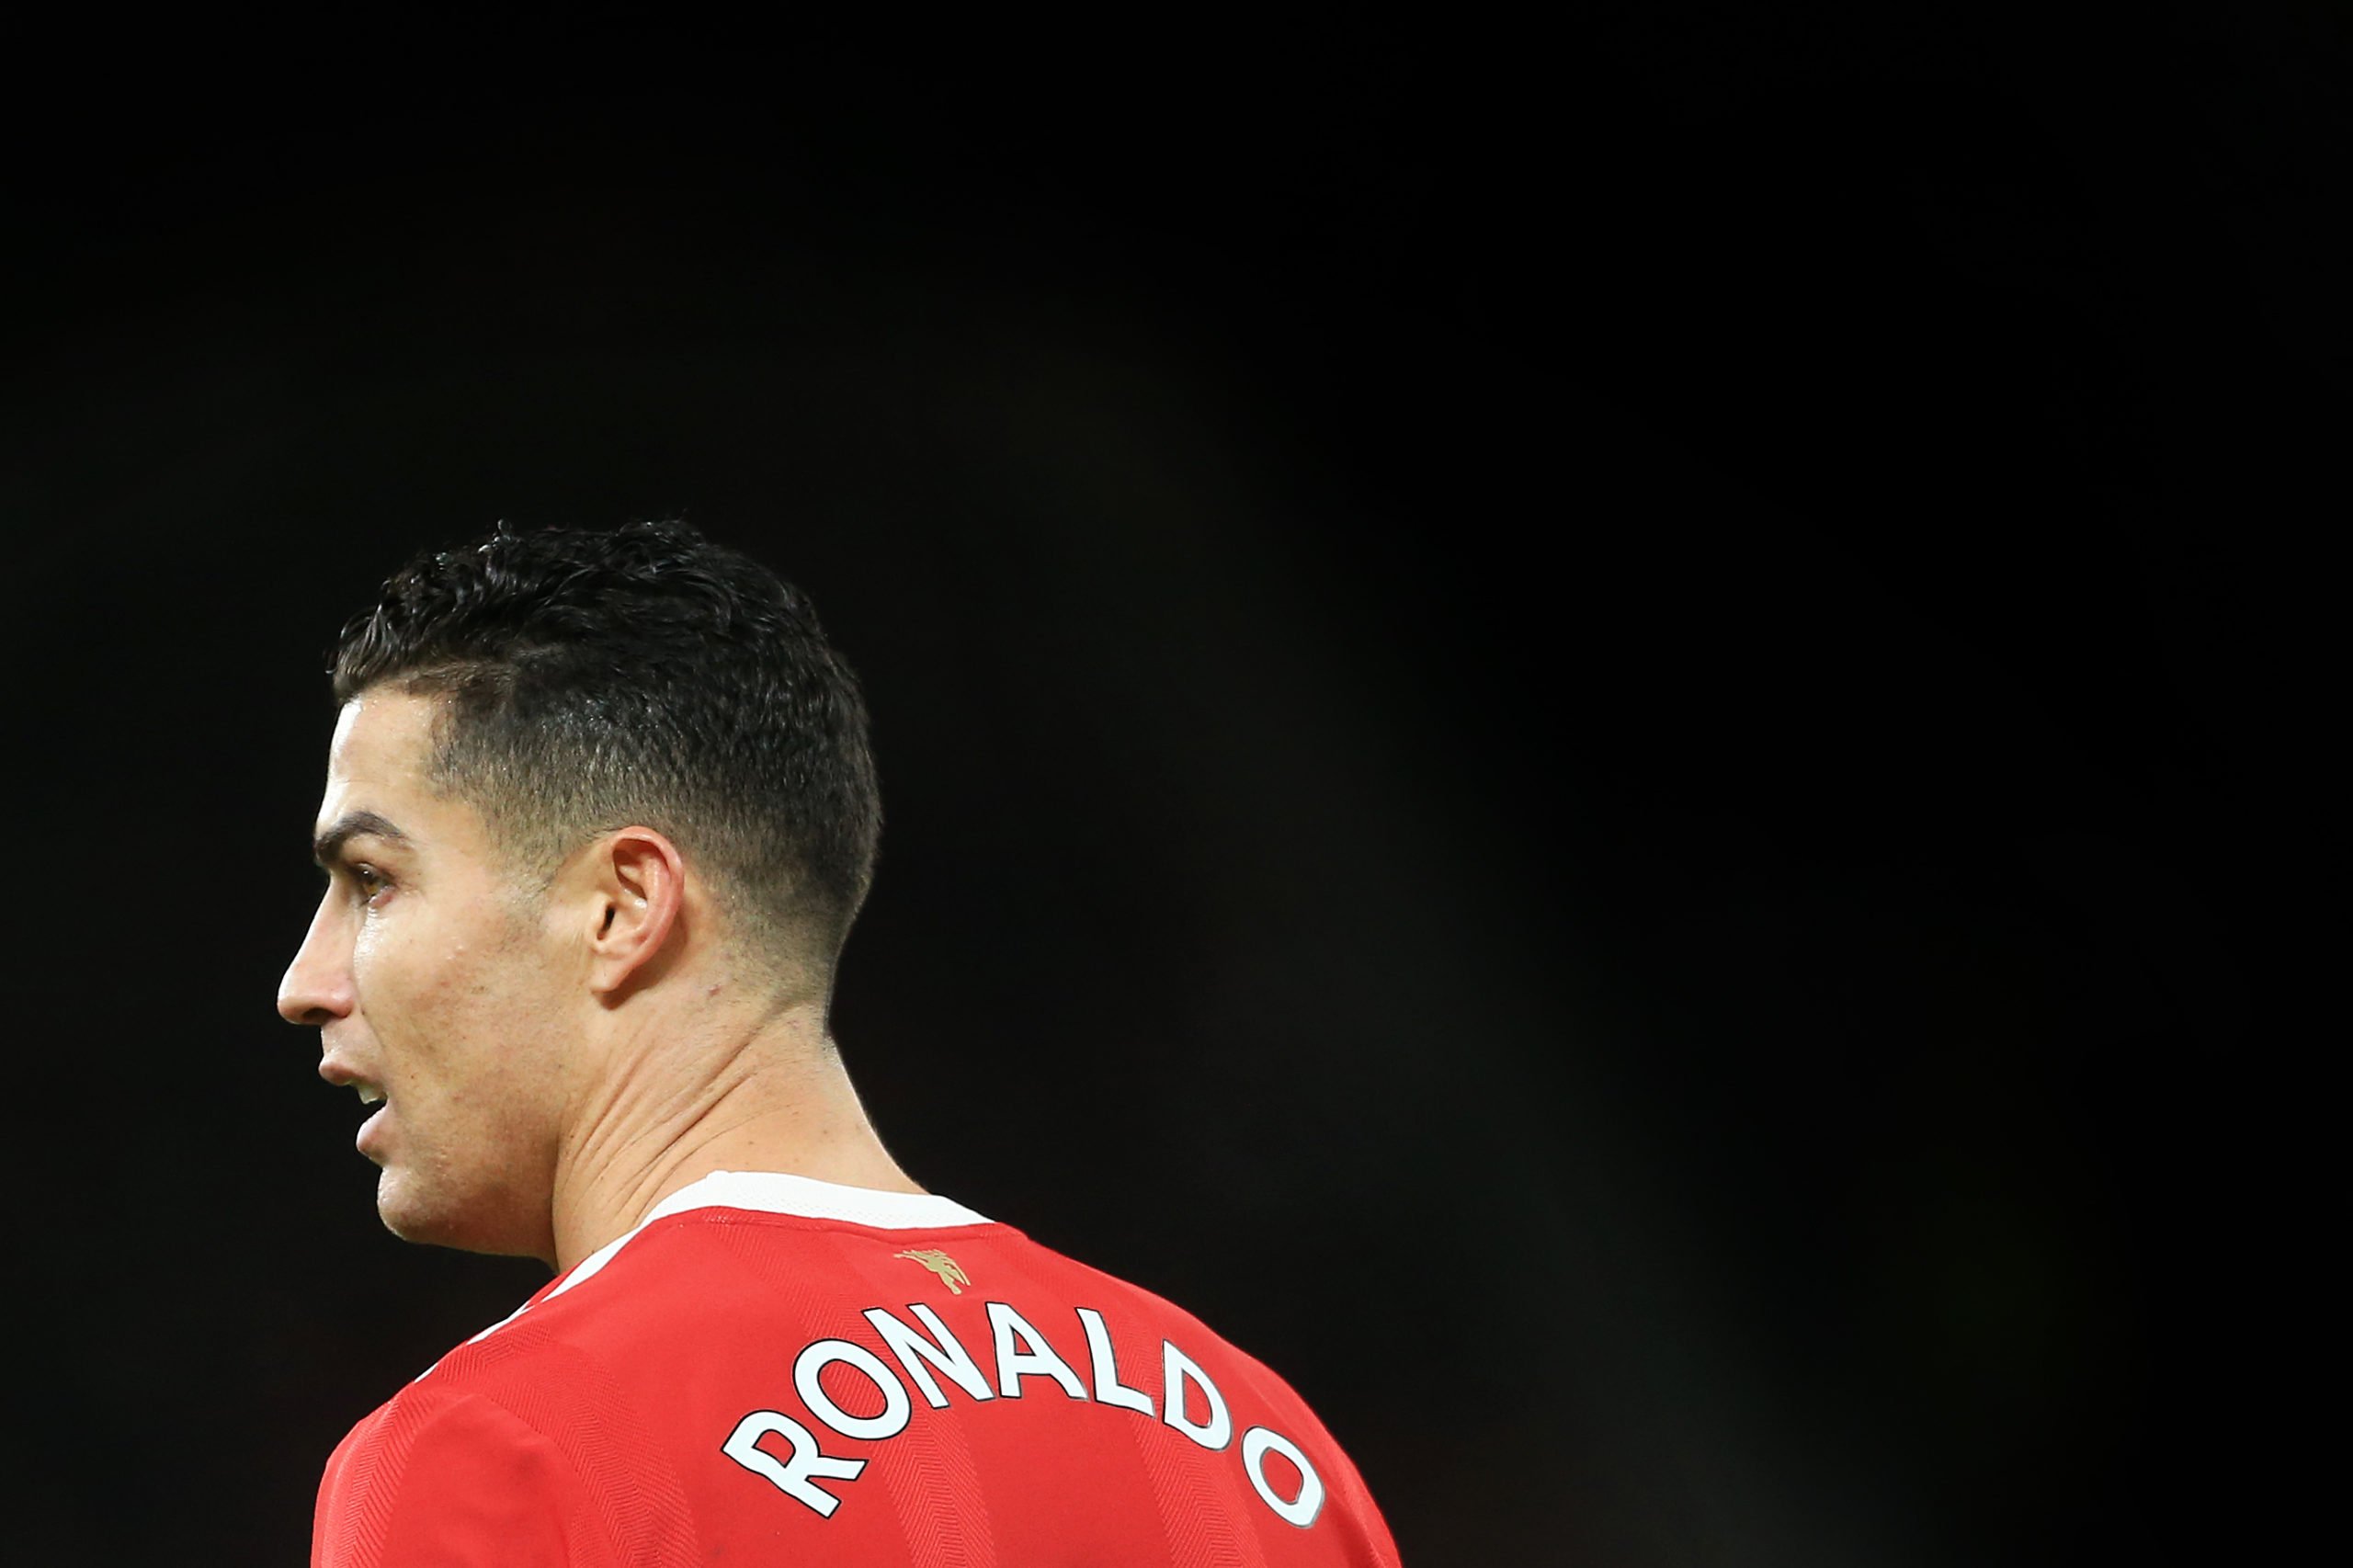 Manchester United's Cristiano Ronaldo tweet gets an angry response from supporters